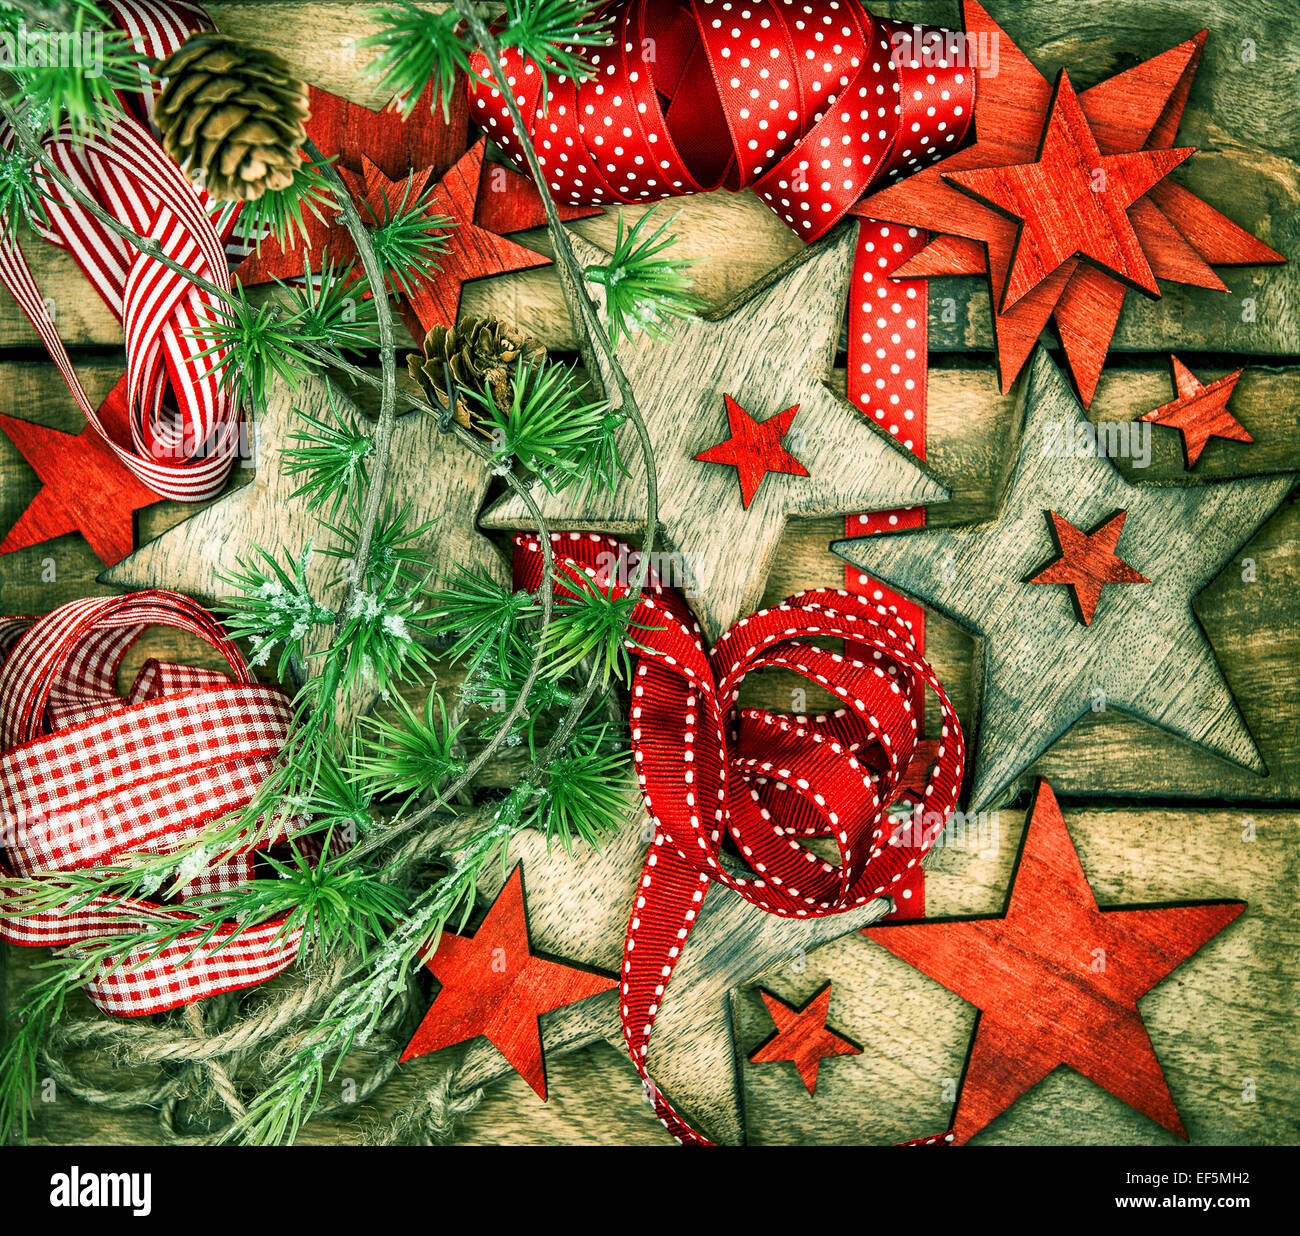 christmas decorations wooden stars and red ribbons for gifts wrapping. nostalgic retro style toned picture Stock Photo